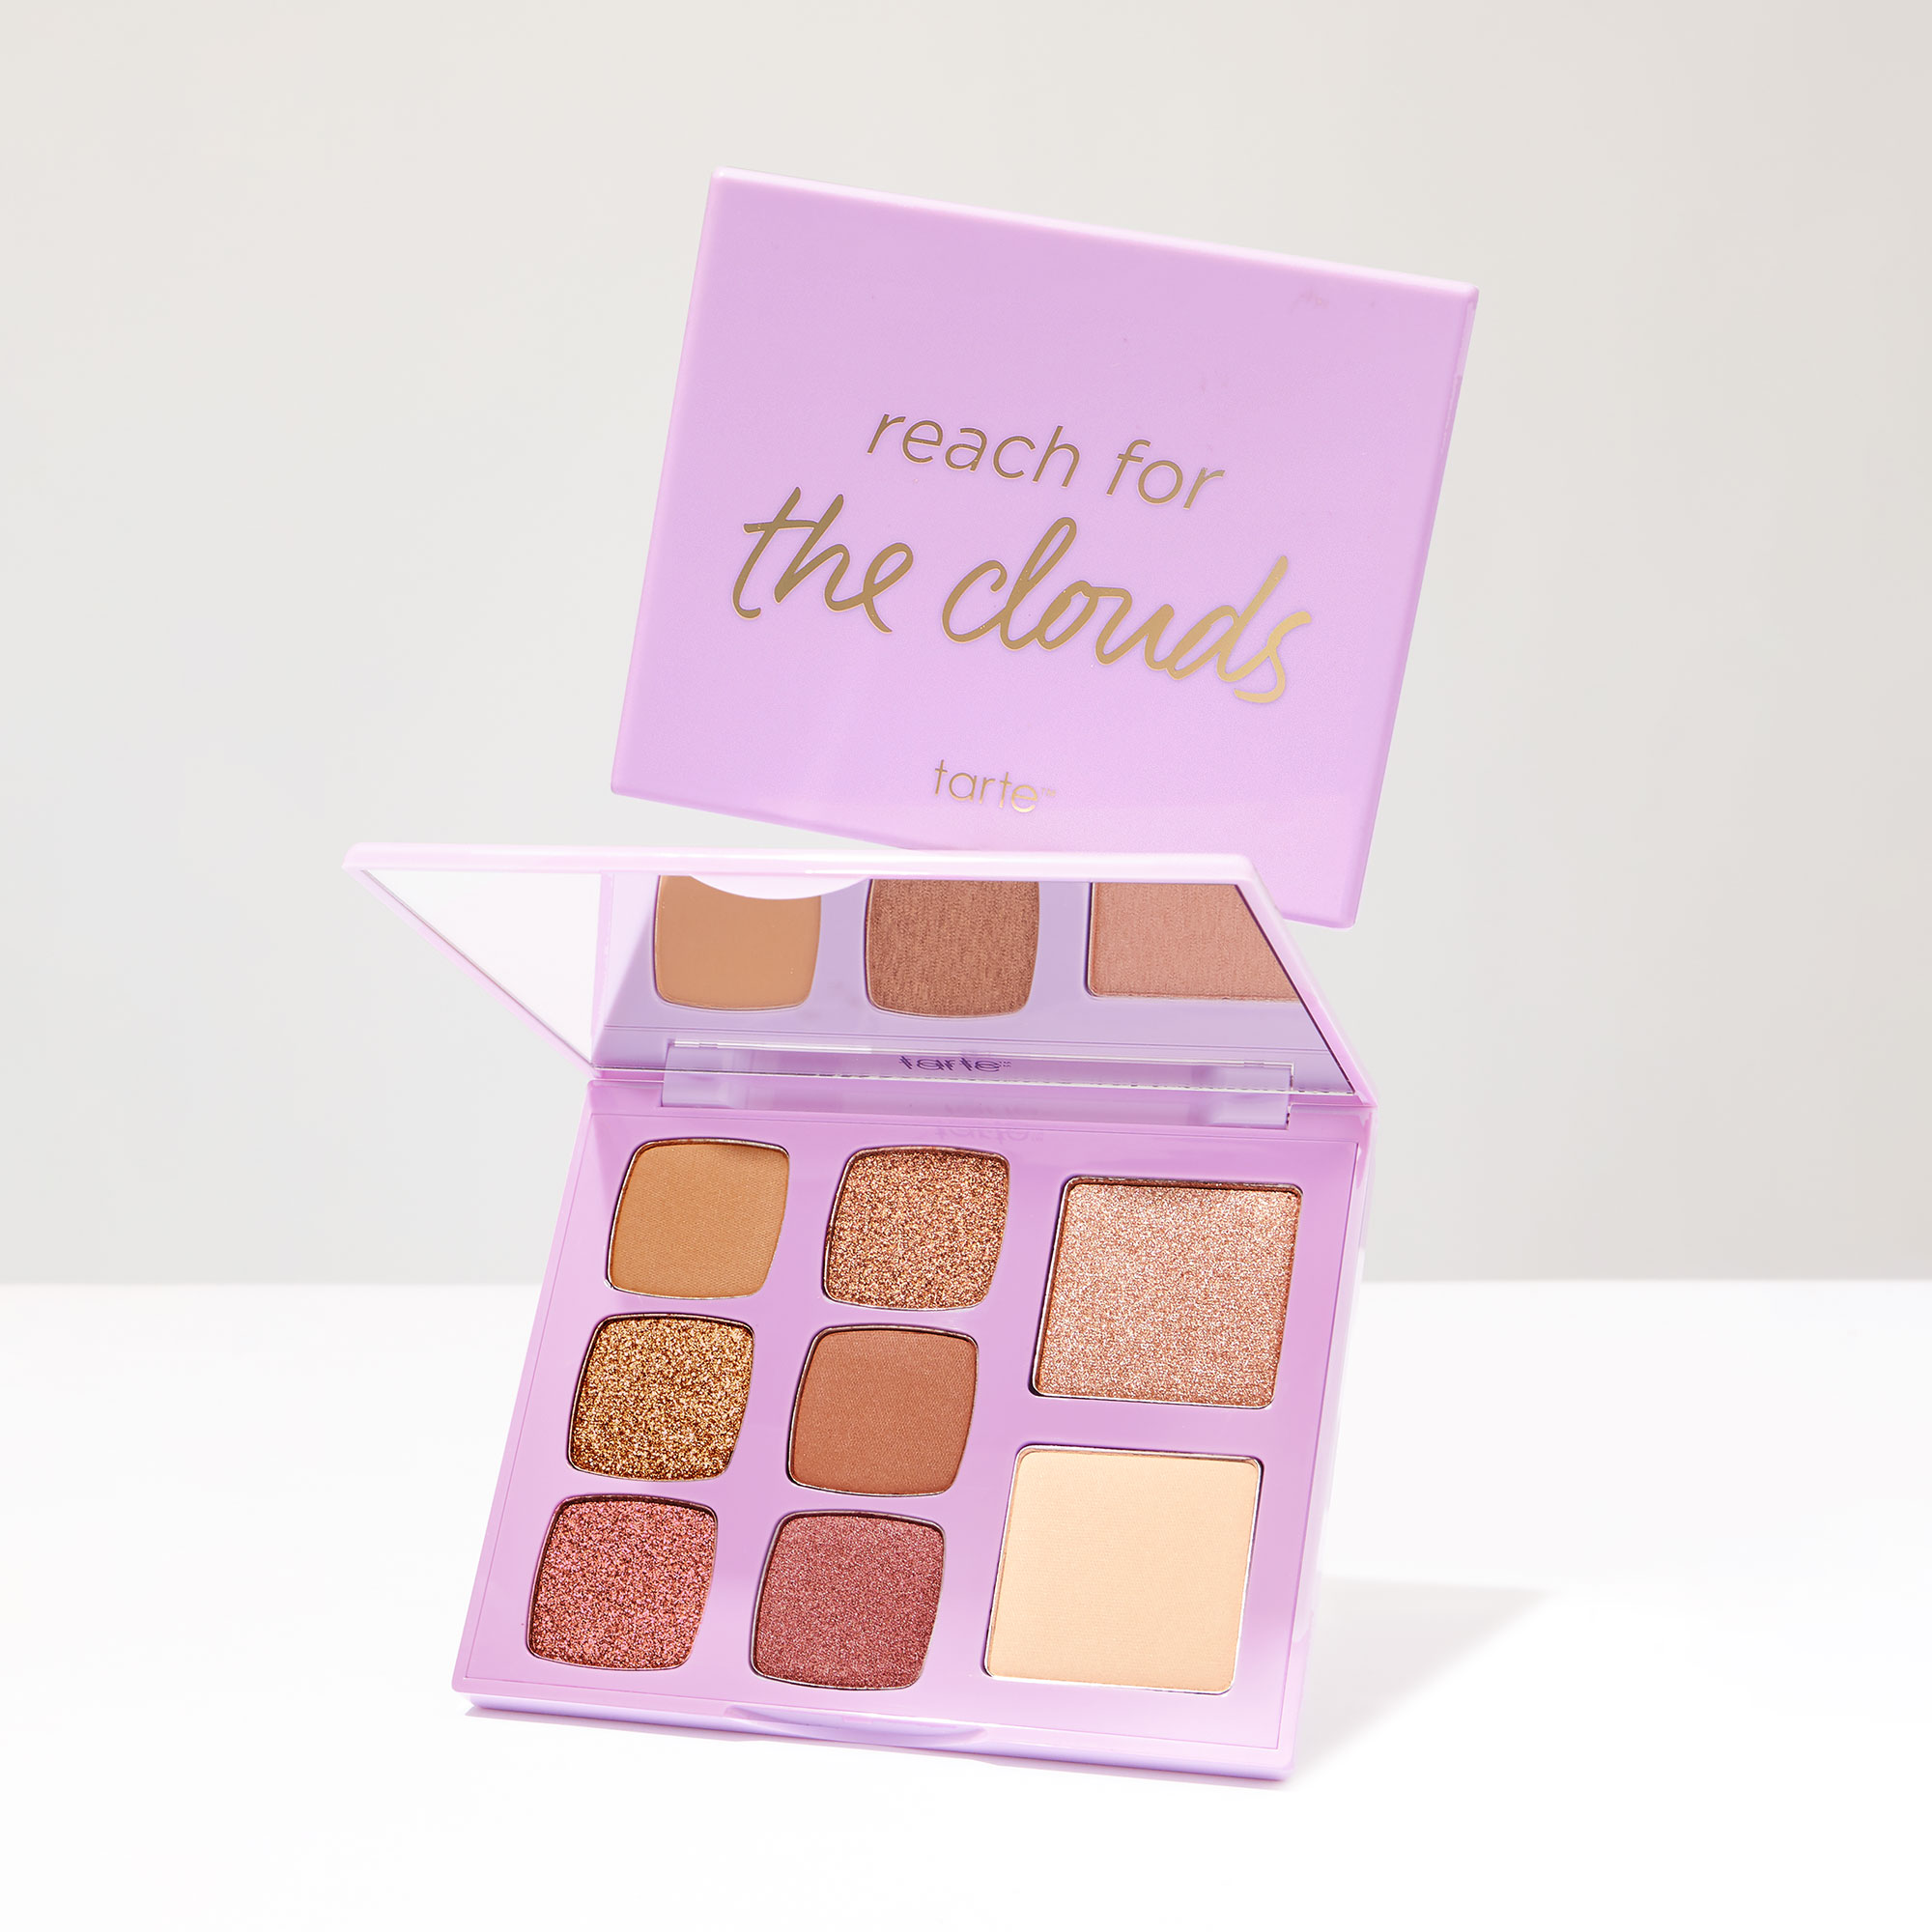 Reach For The Clouds Eyeshadow Palette